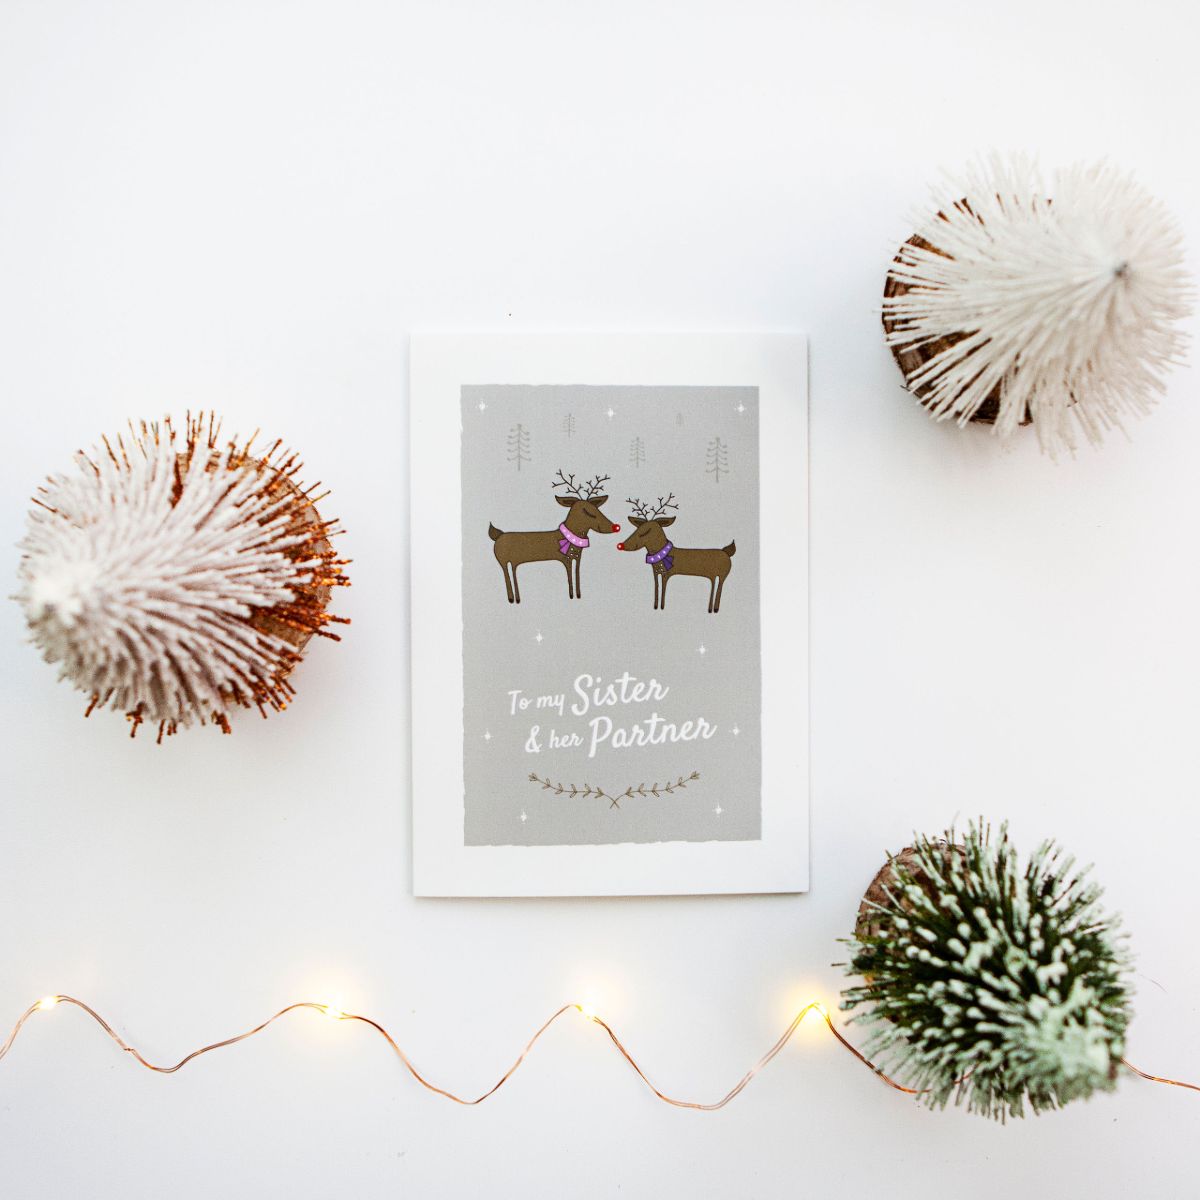 To my Lesbian Sister and her Partner Christmas Day Card Reindeer